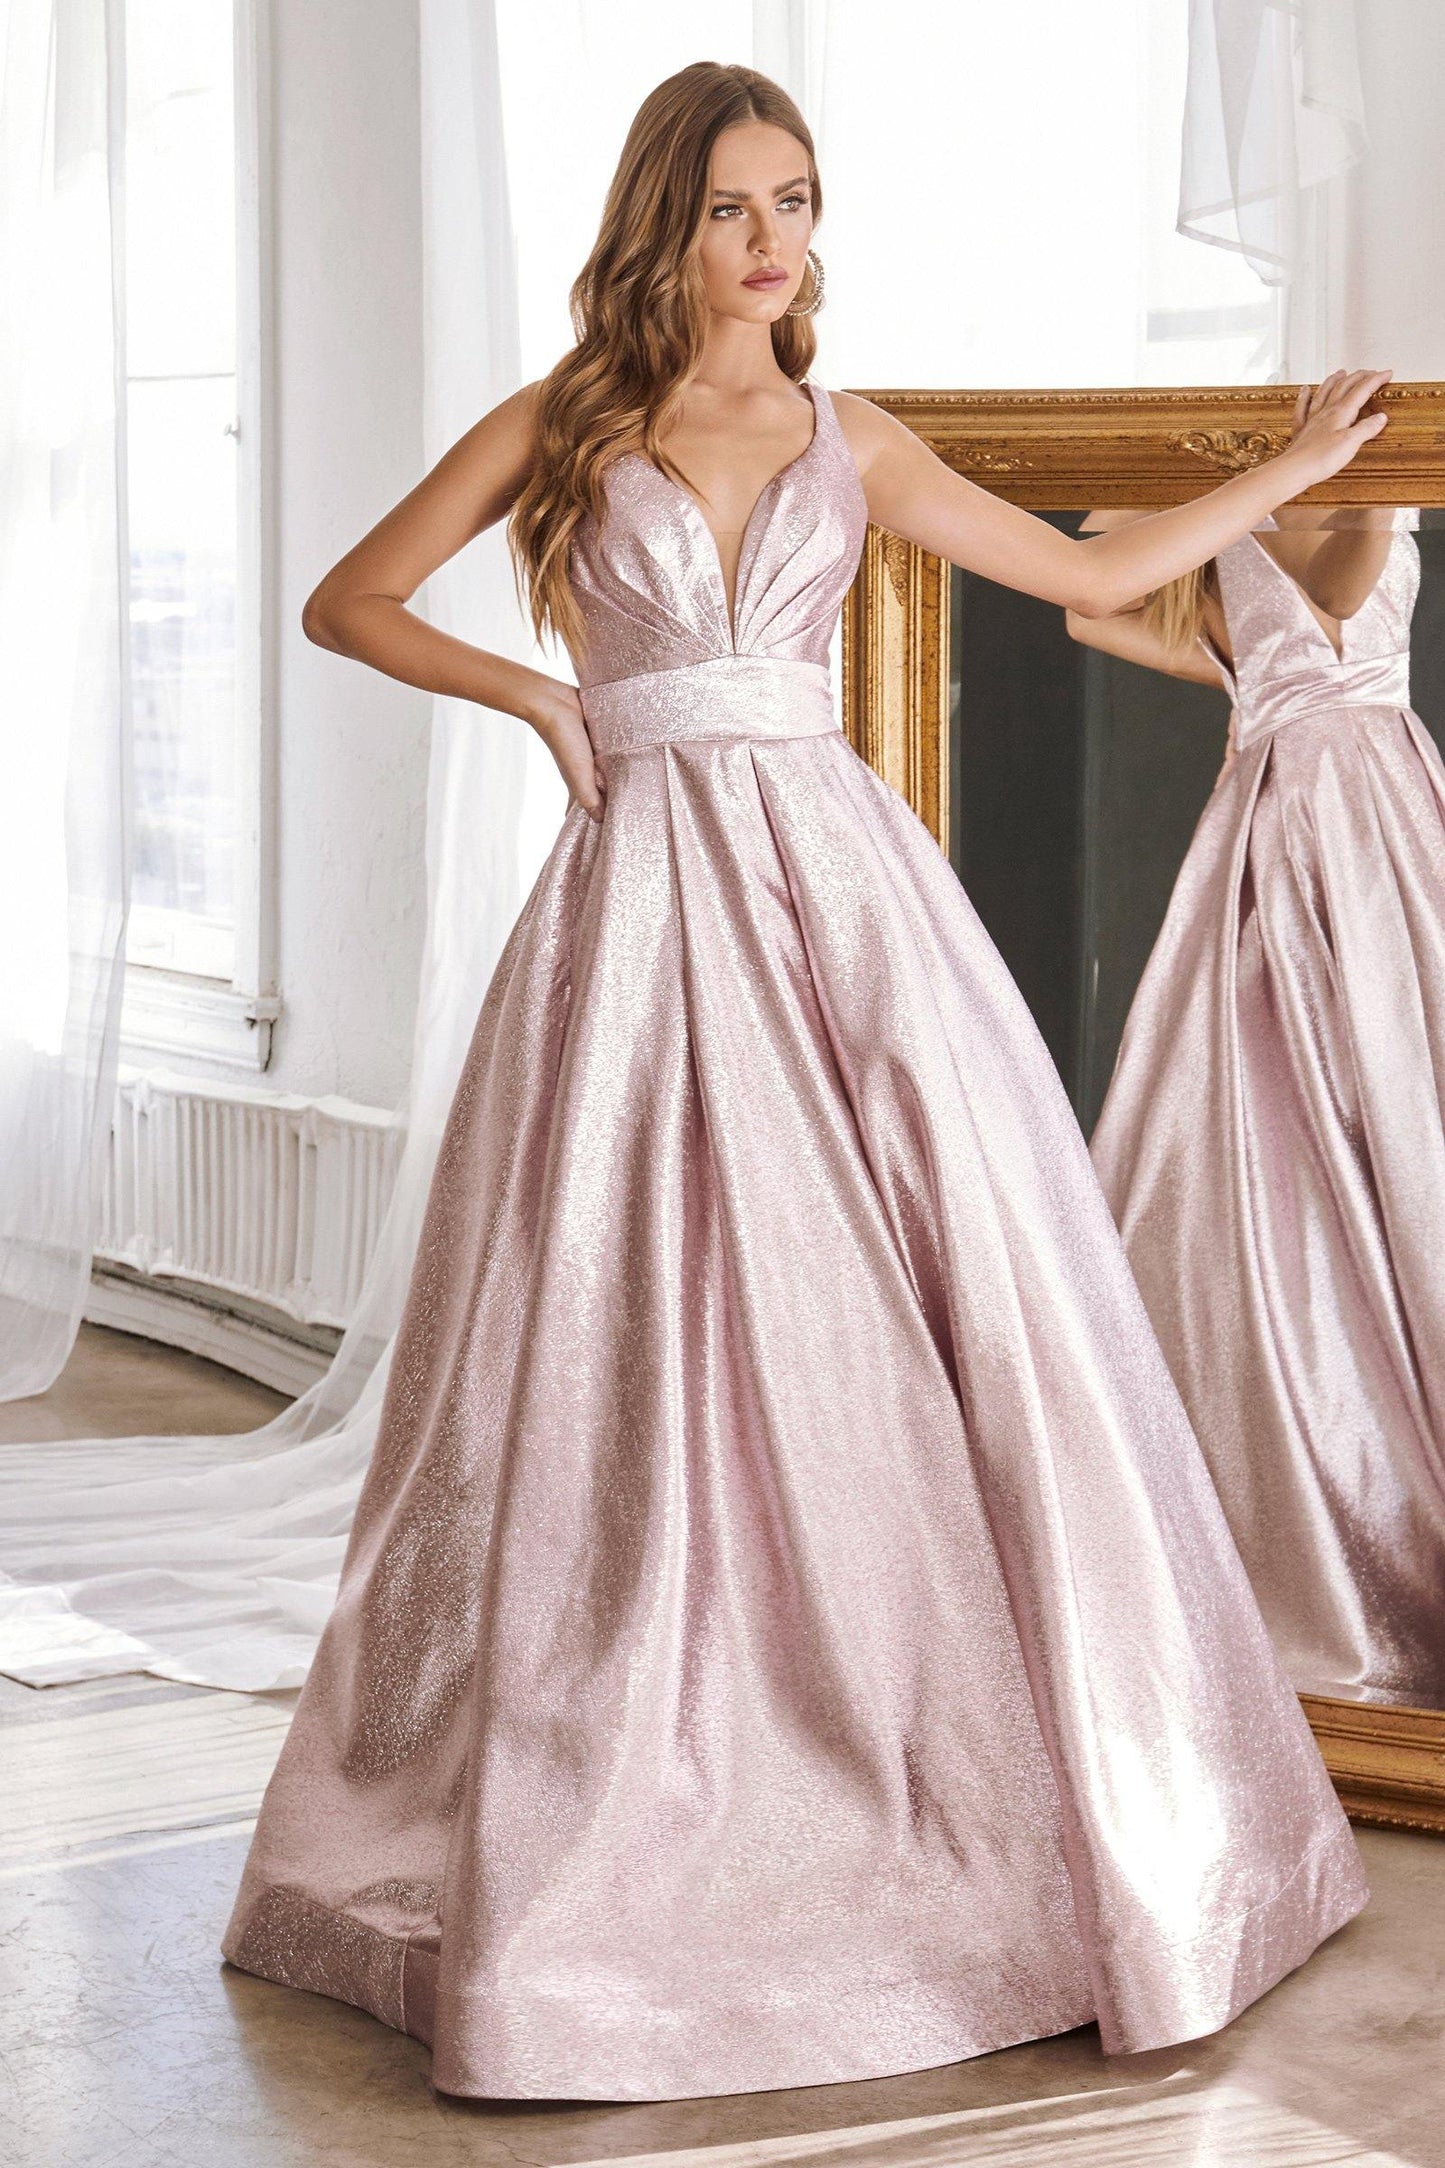 Long Formal Sleeveless Metallic Prom Ball Gown - The Dress Outlet Cinderella Divine